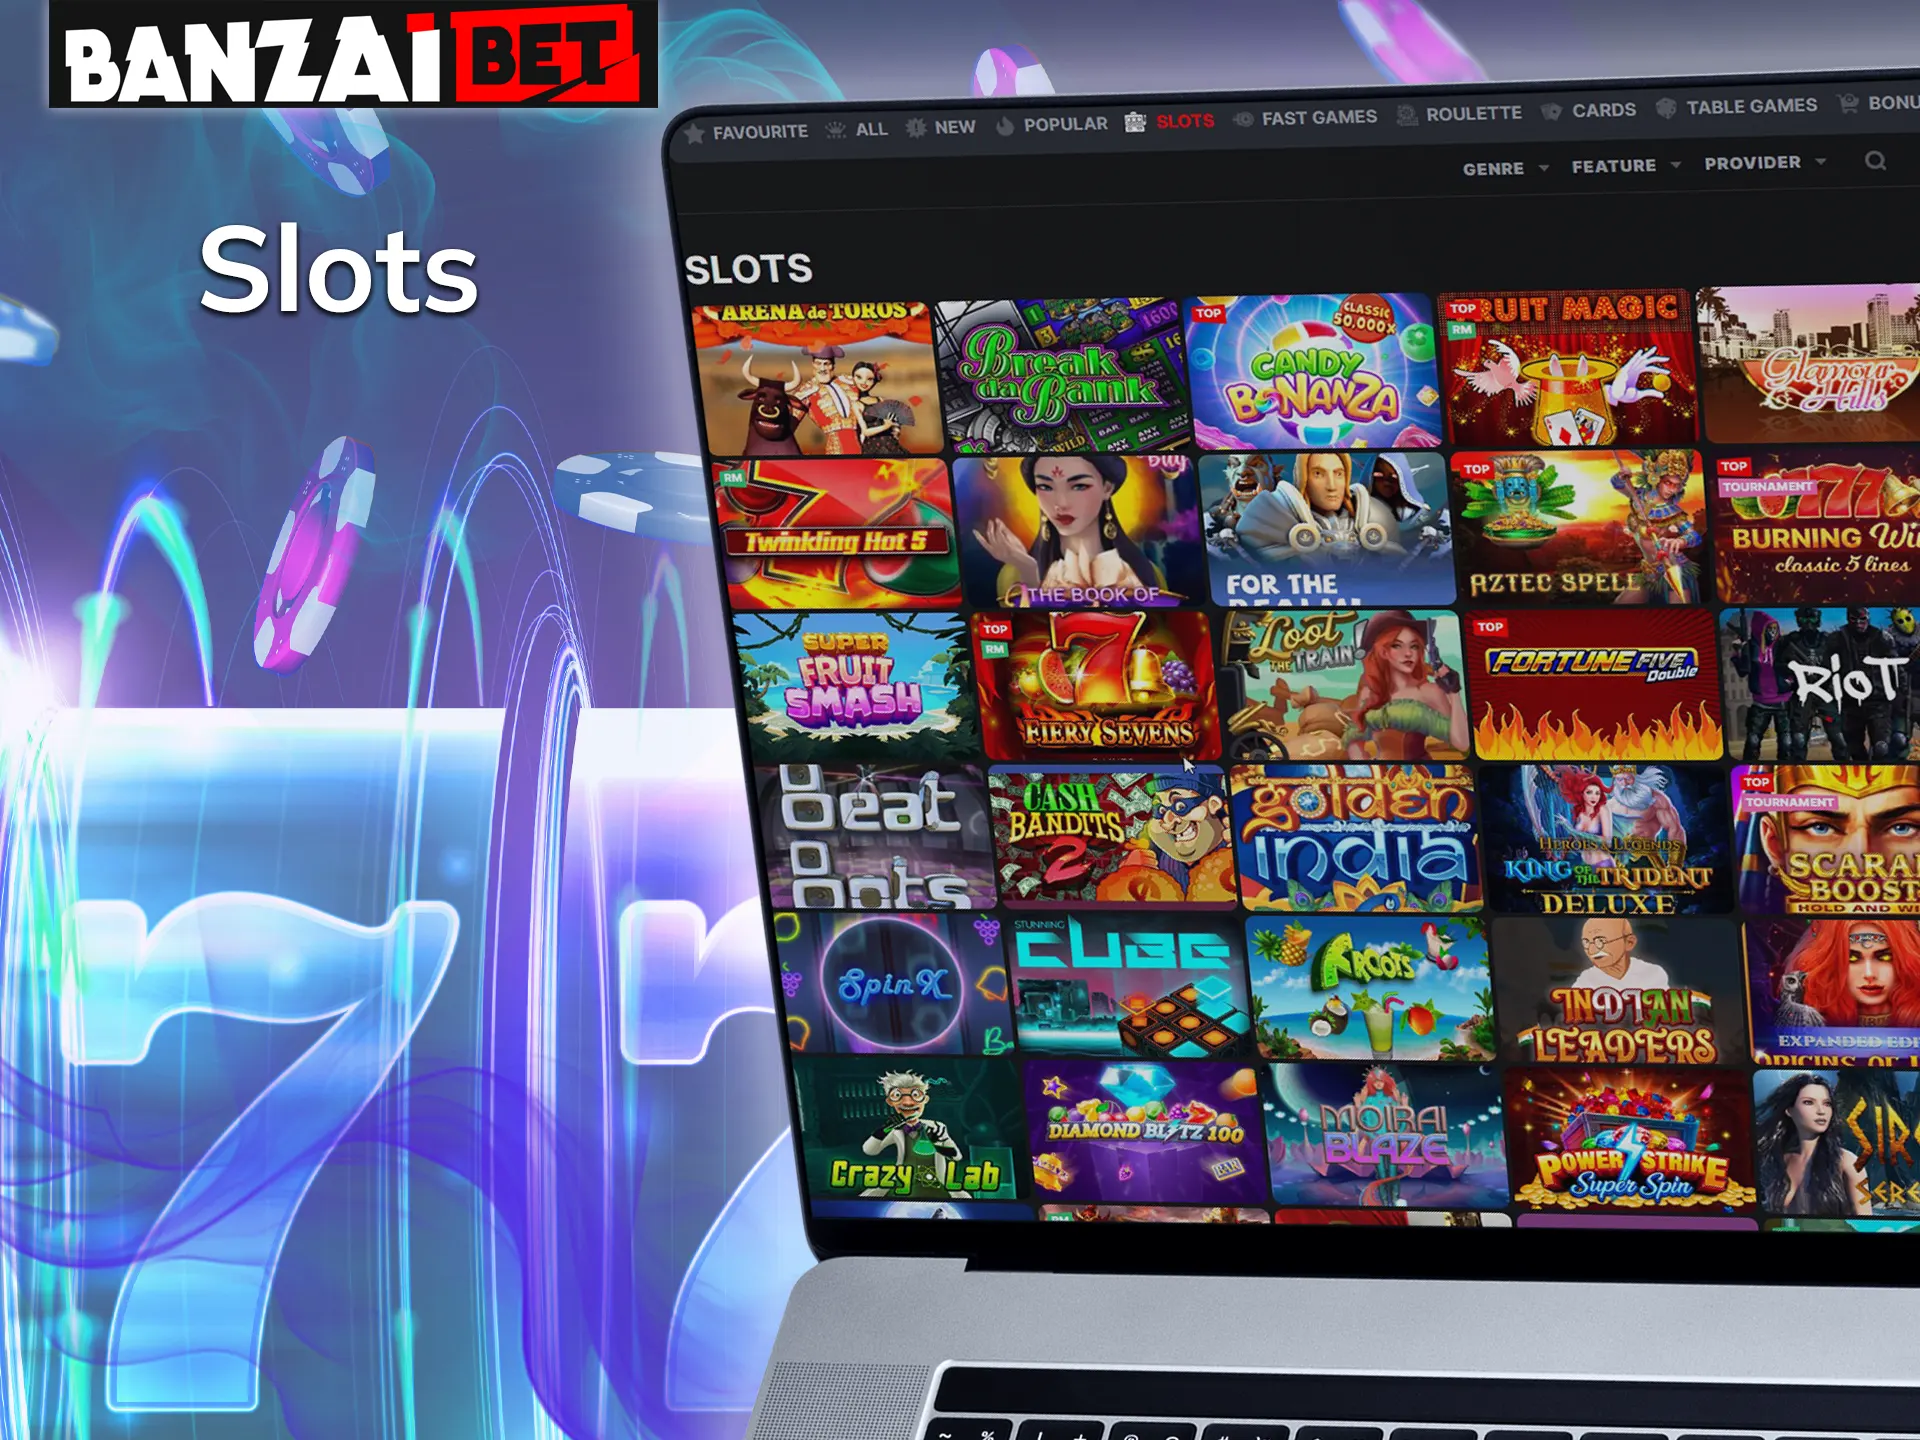 Check out the best slots of the Banzai Bet site.